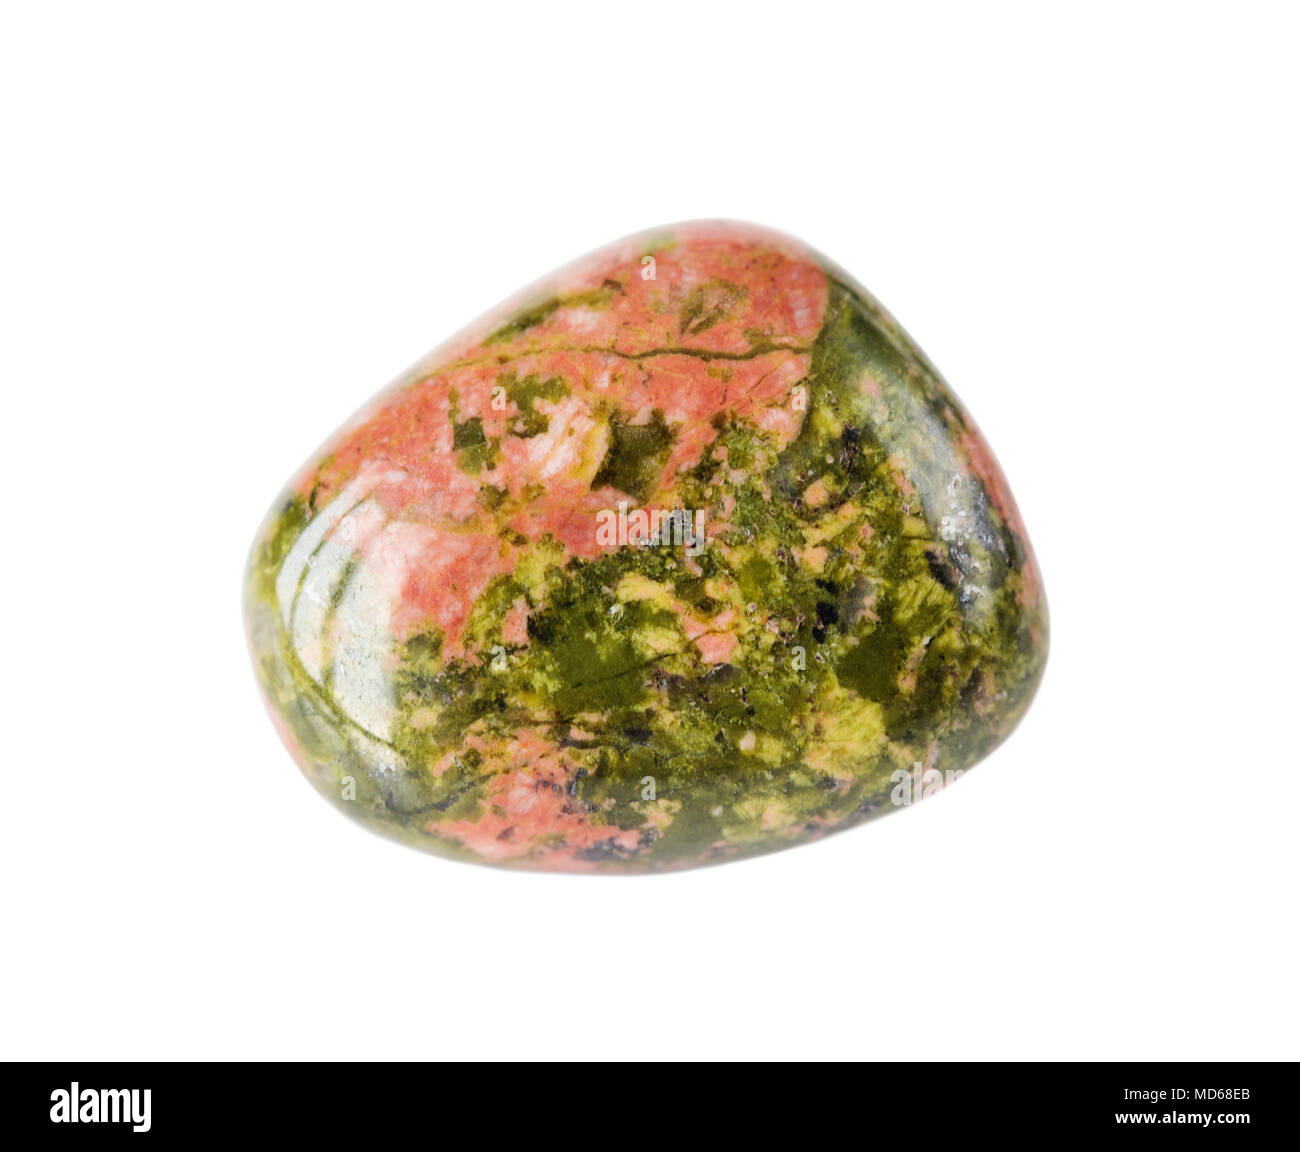 The pink gems stock image. Image of star, round, nature - 22908417